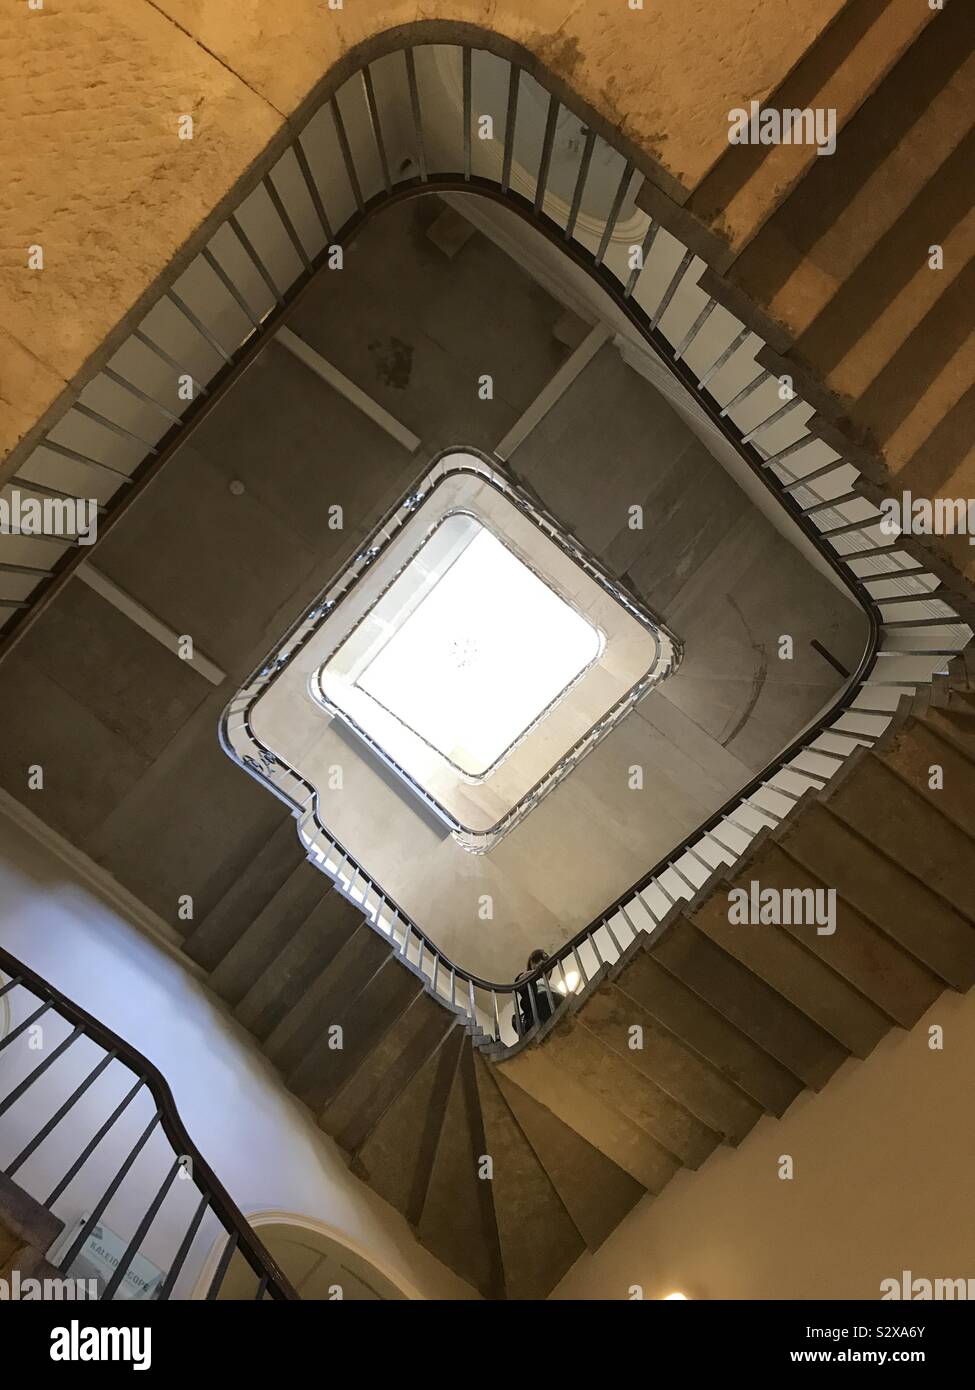 An winding stairwell viewed from below. Stock Photo